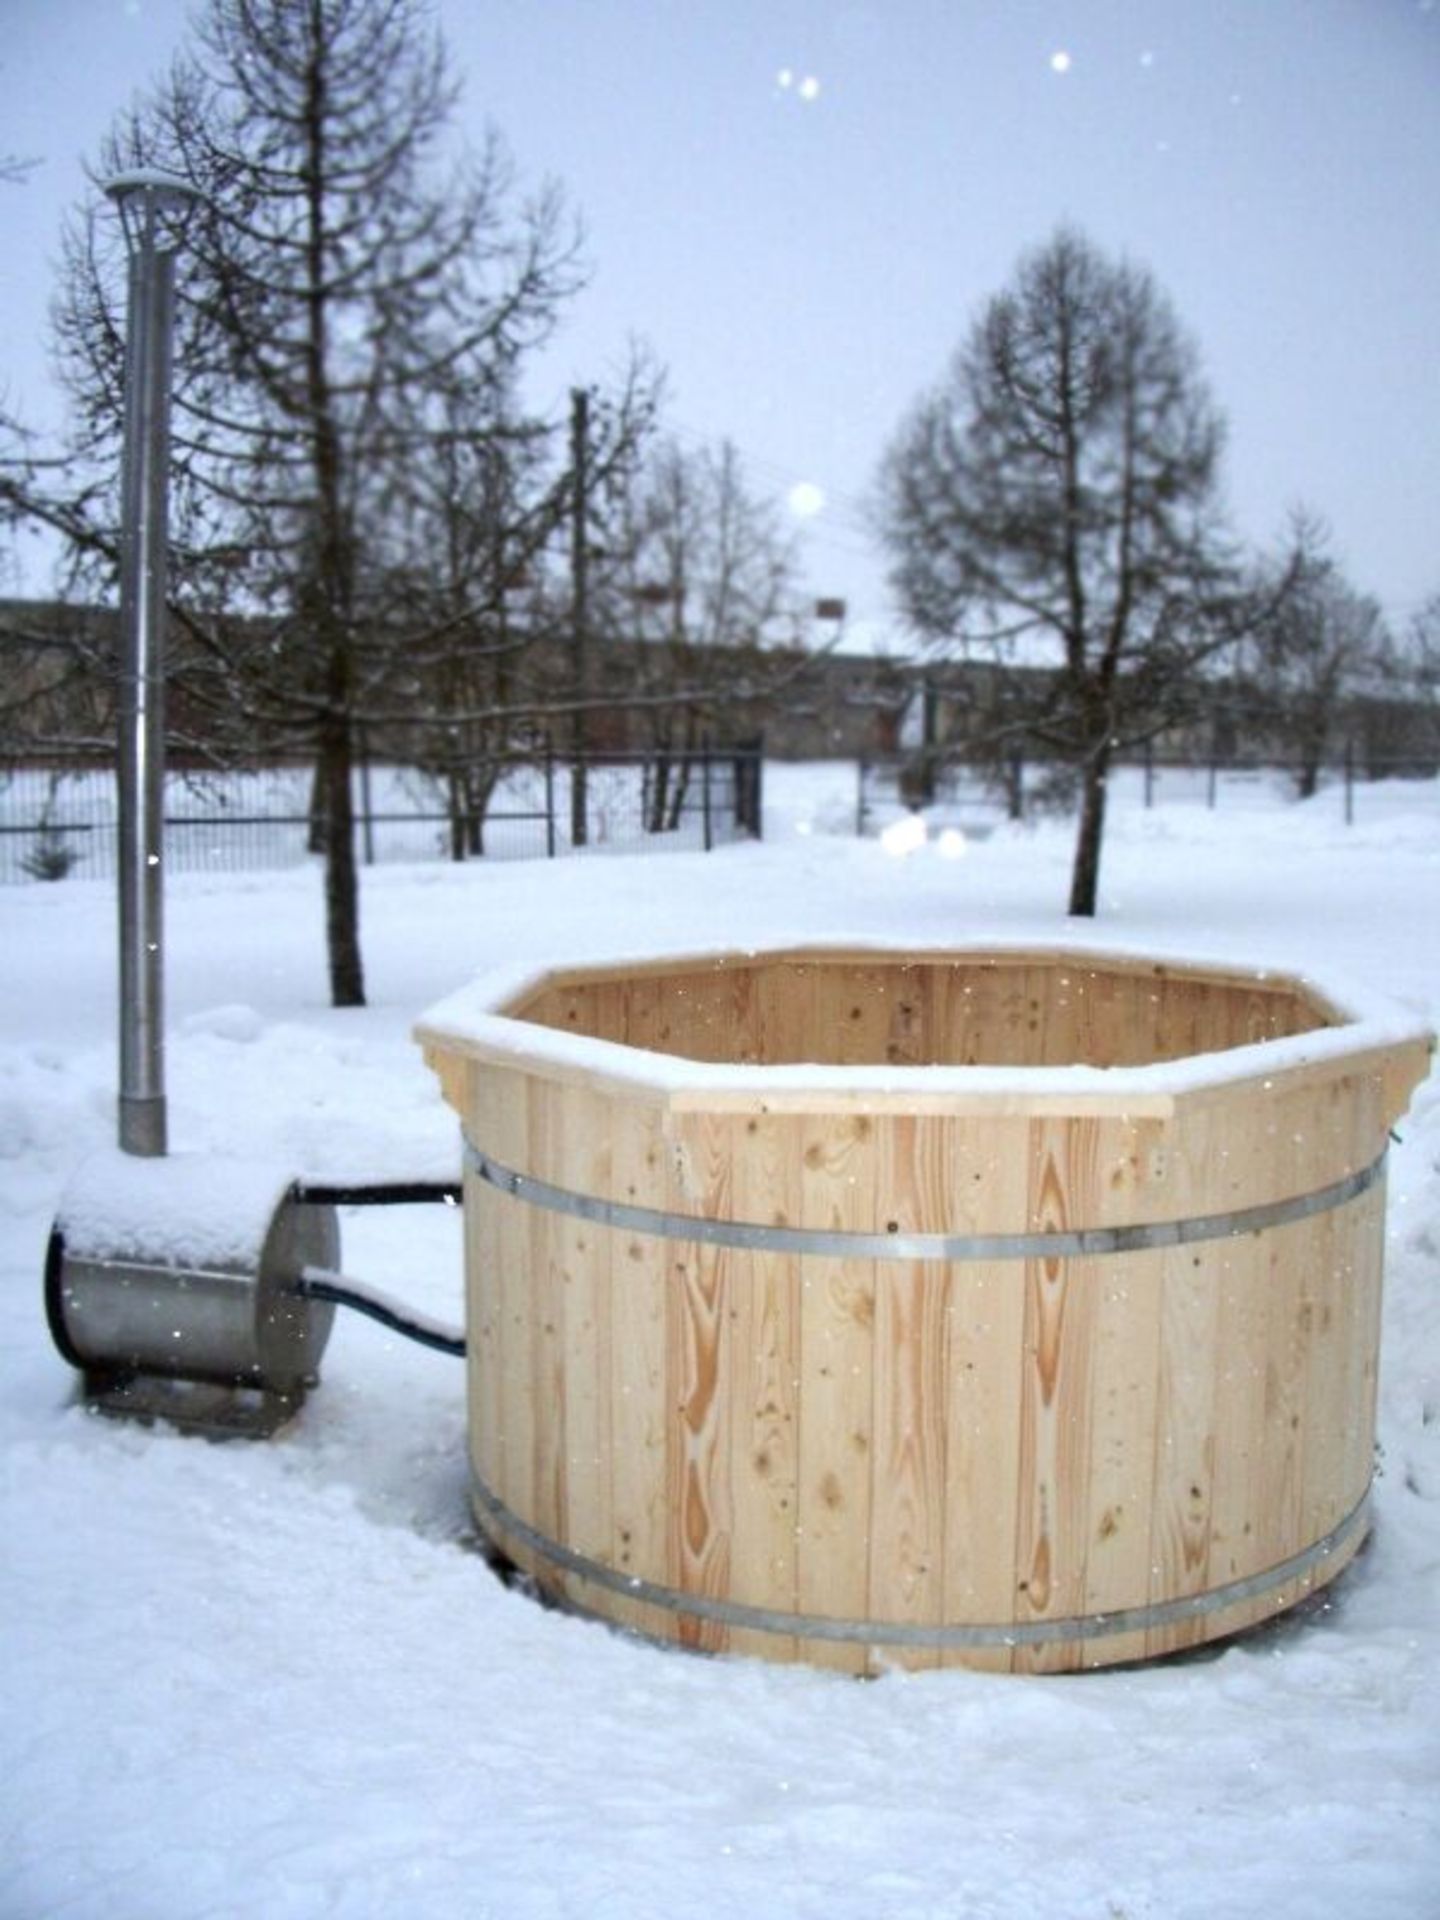 V Brand New 2.2m Spruce Hot Tub with External Wood Burning Heater - Outlet Valve for Hose Connection